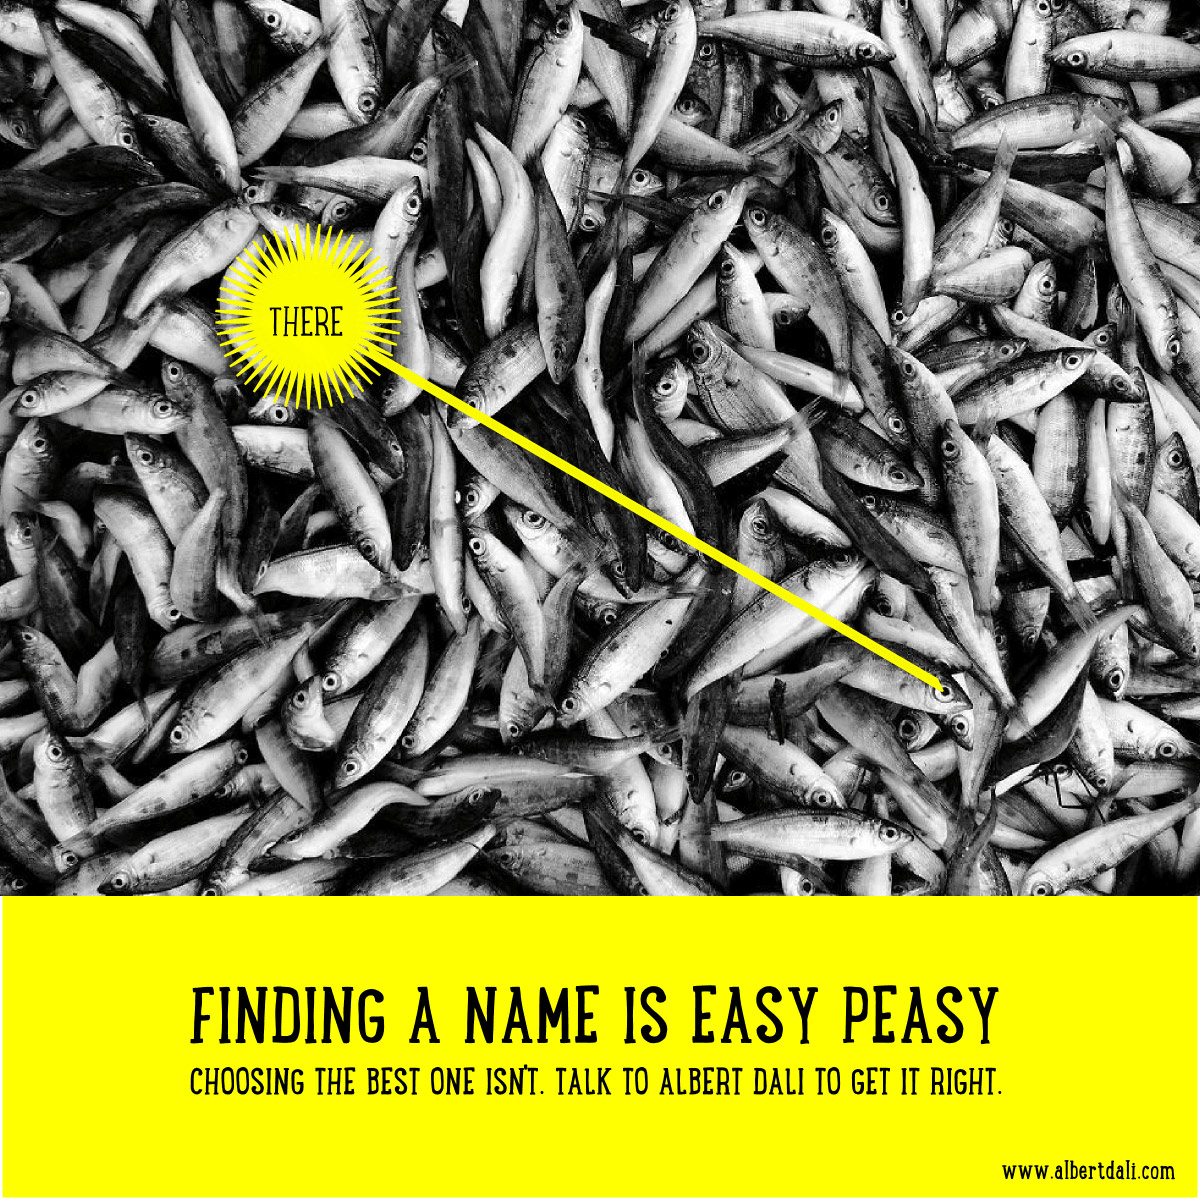 Albert Dali: 'Finding a name is Easy Peasy' Campaigns of the World®